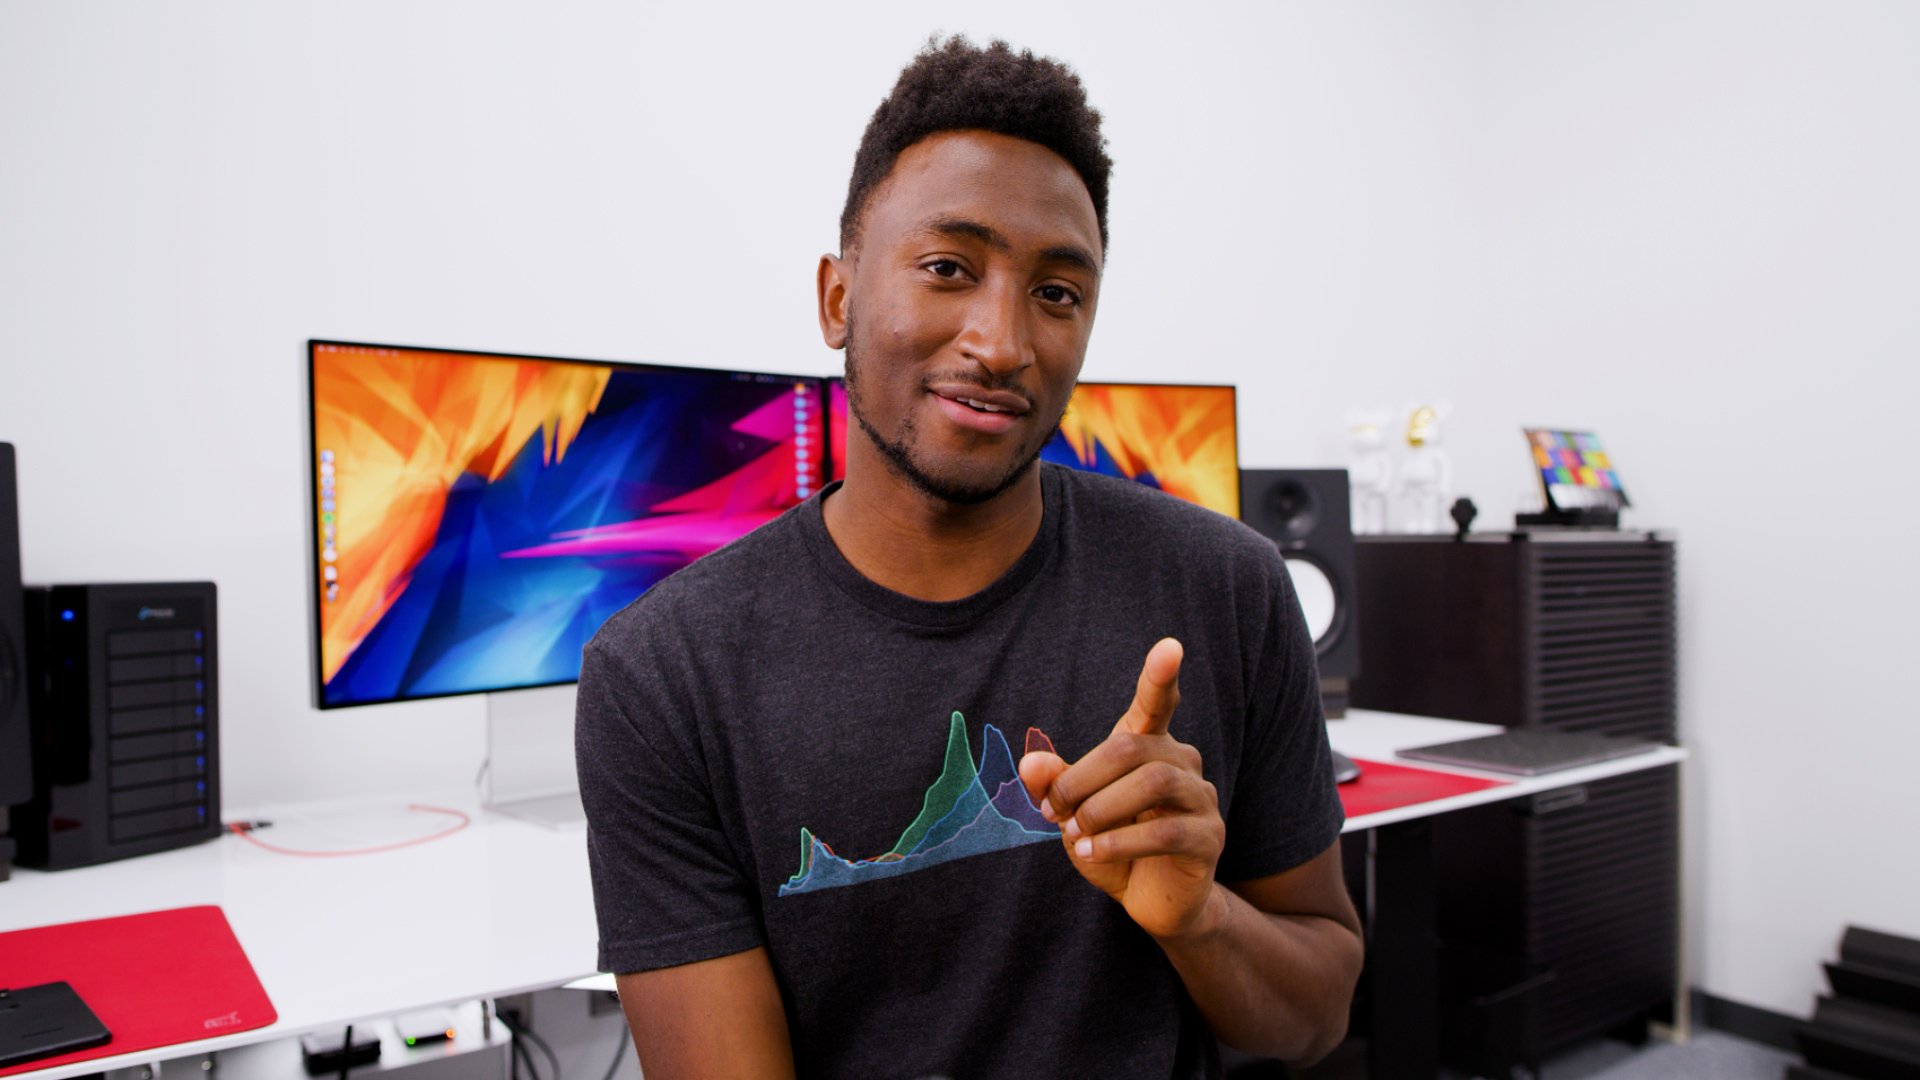 Marques Brownlee: YouTuber, Content Creator and So Much More ...